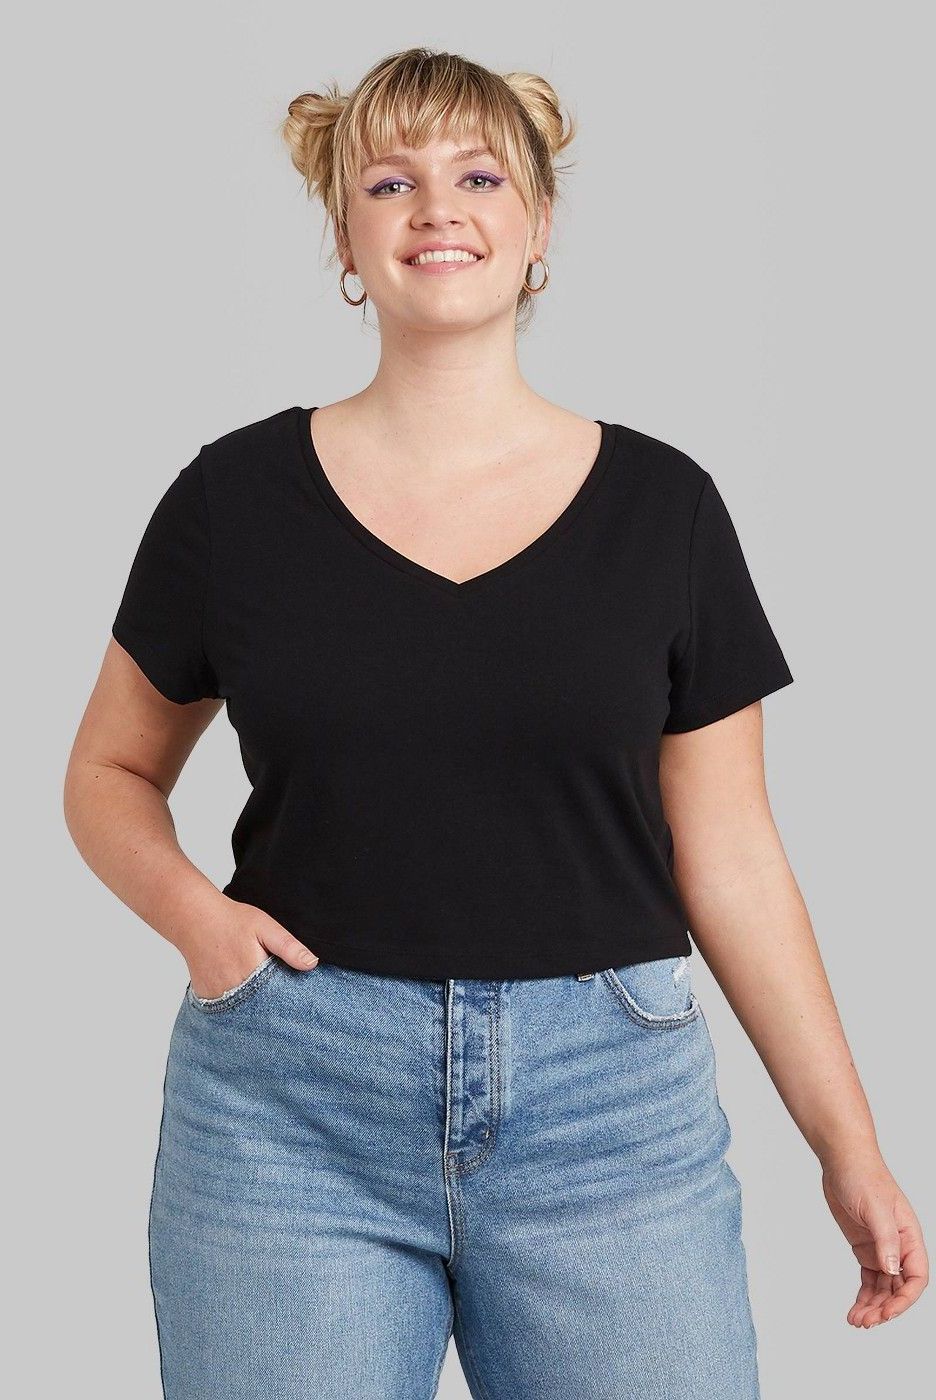 Just My Size V Neck Tee Women's Cotton Jersey Short-Sleeve Plus